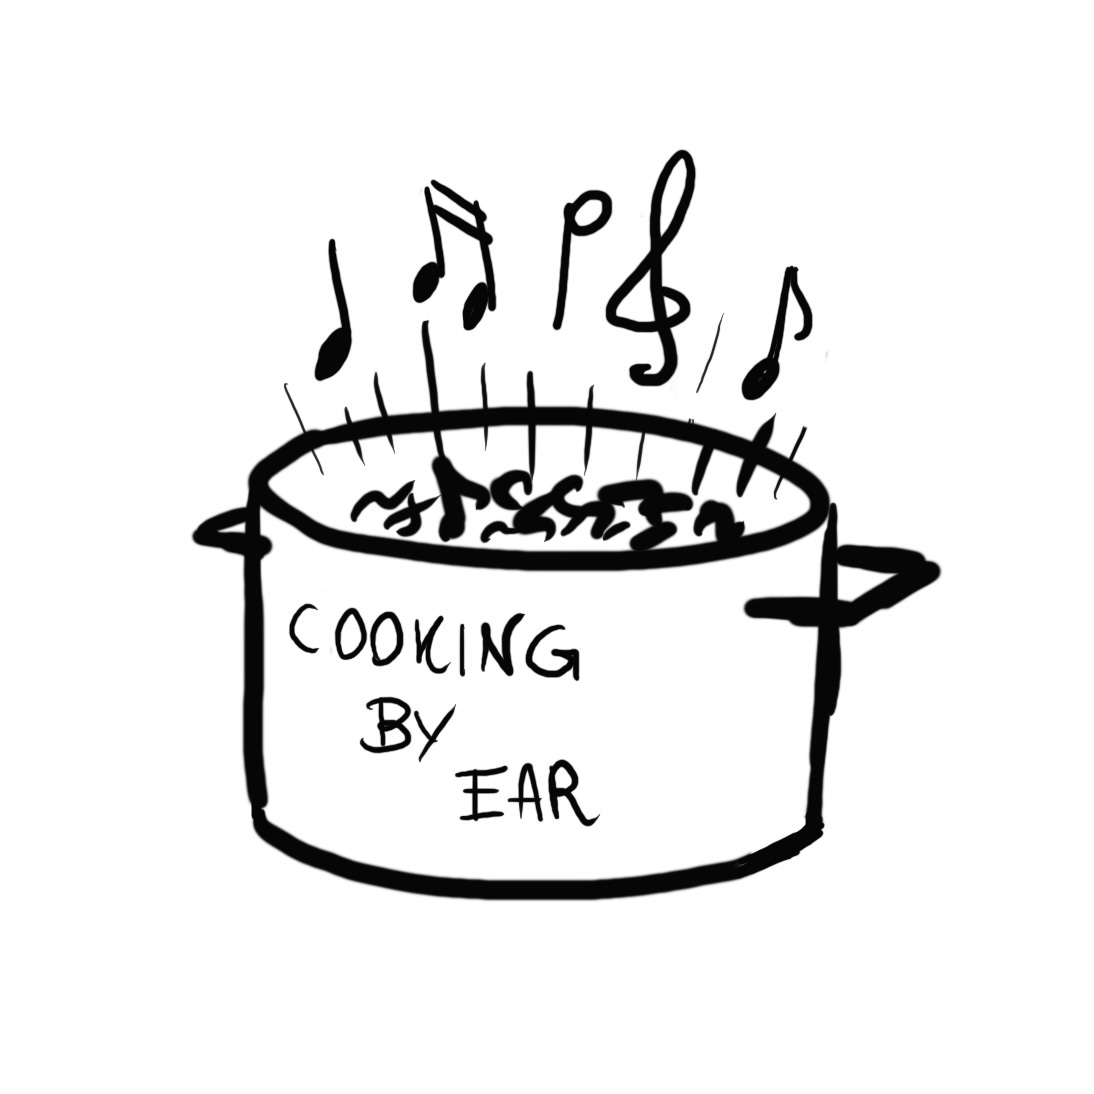 Cooking by Ear